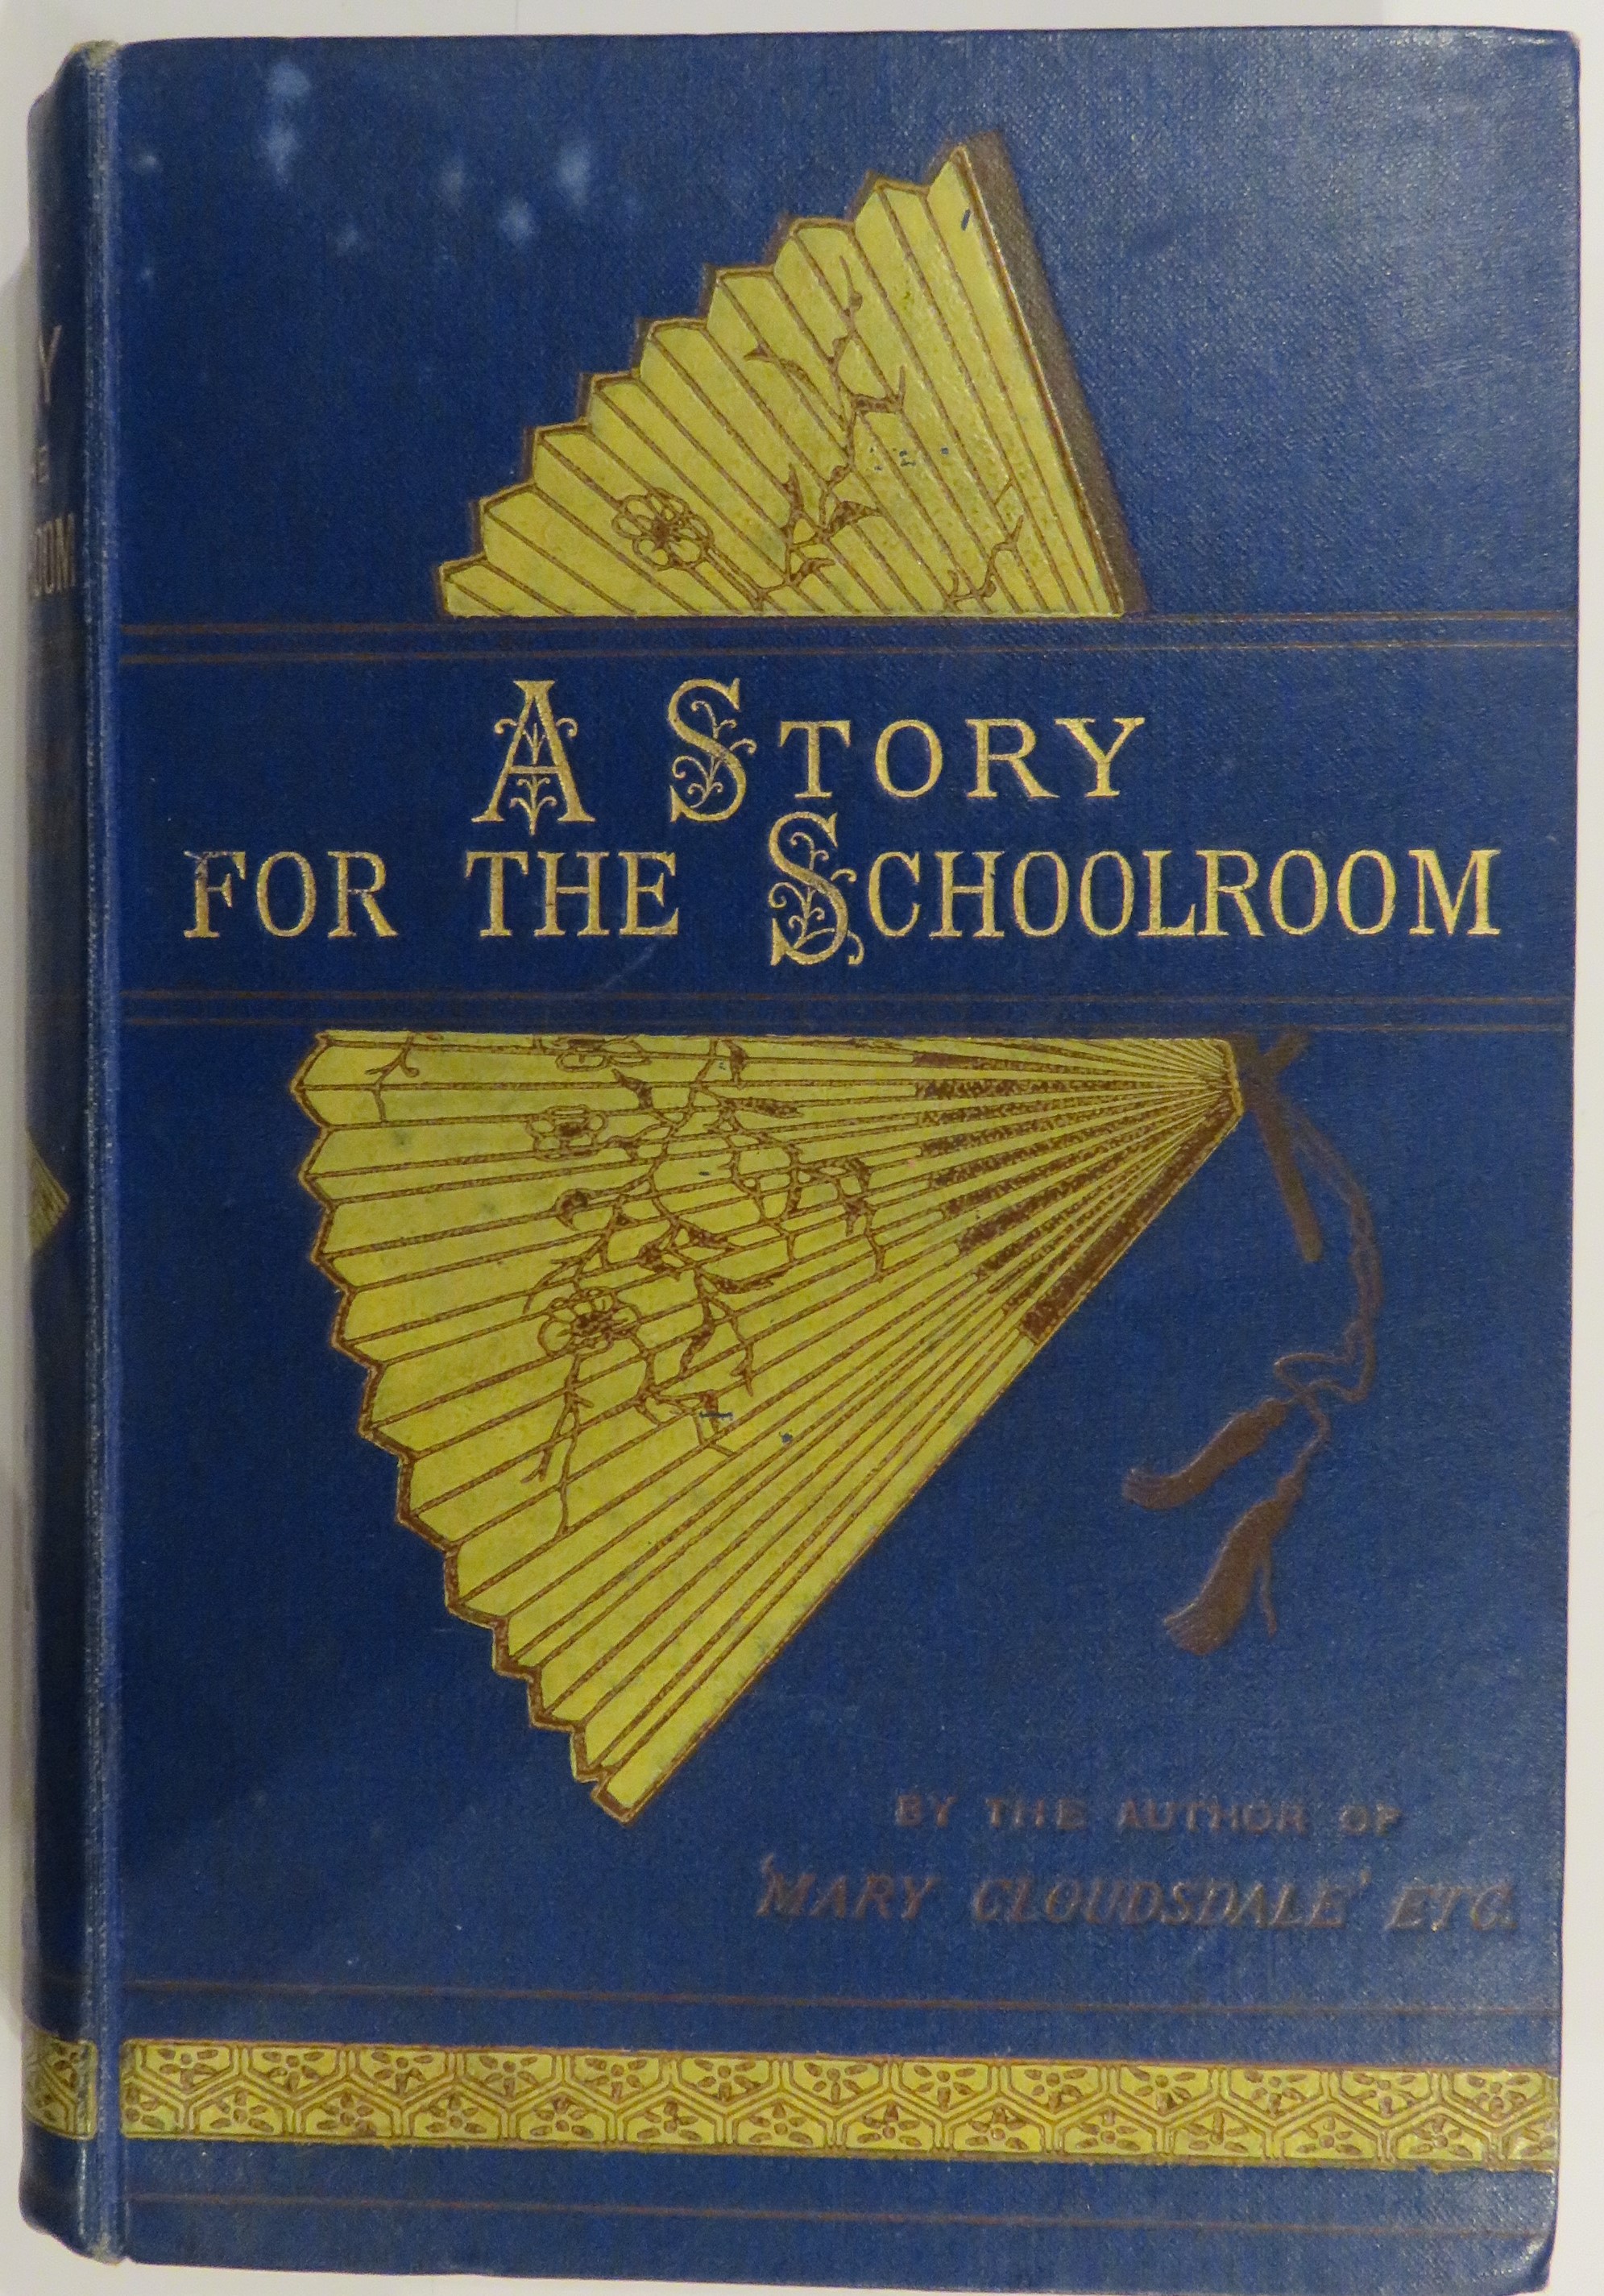 A Story for the Schoolroom